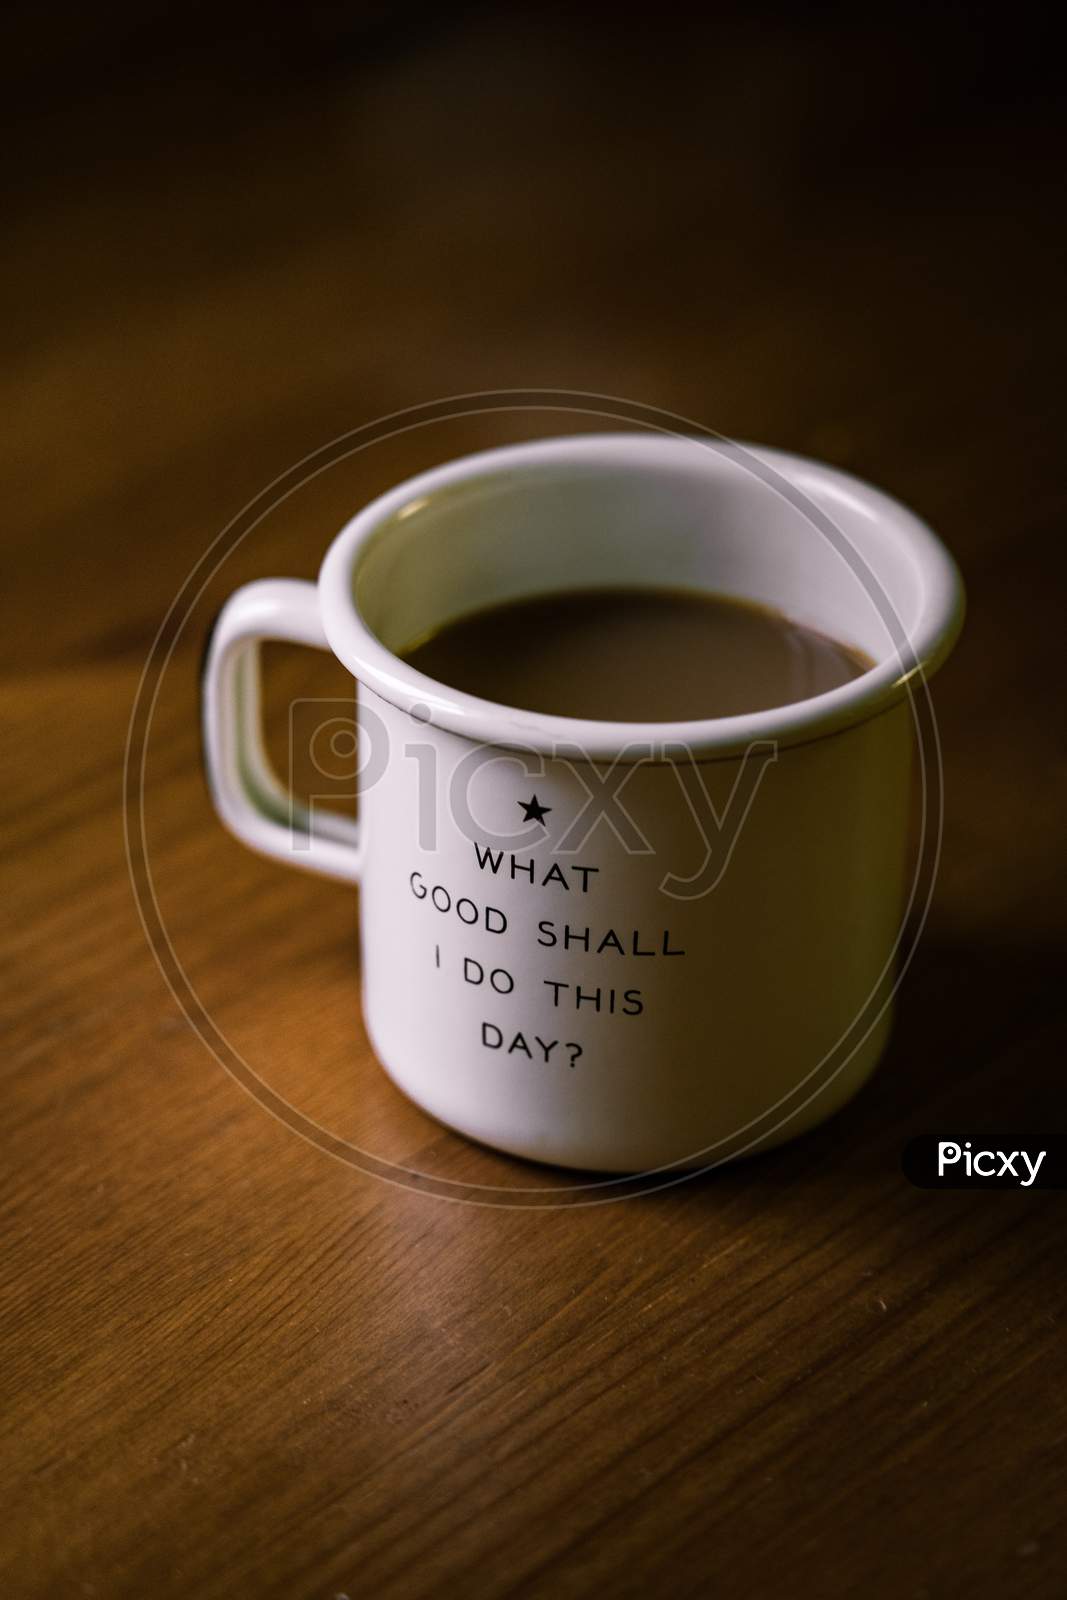 White Coffee Mug With Motivational Quote " WHAT GOOD SHALL  I DO  THIS DAY? " In The Coffee Mug With Coffee In It.